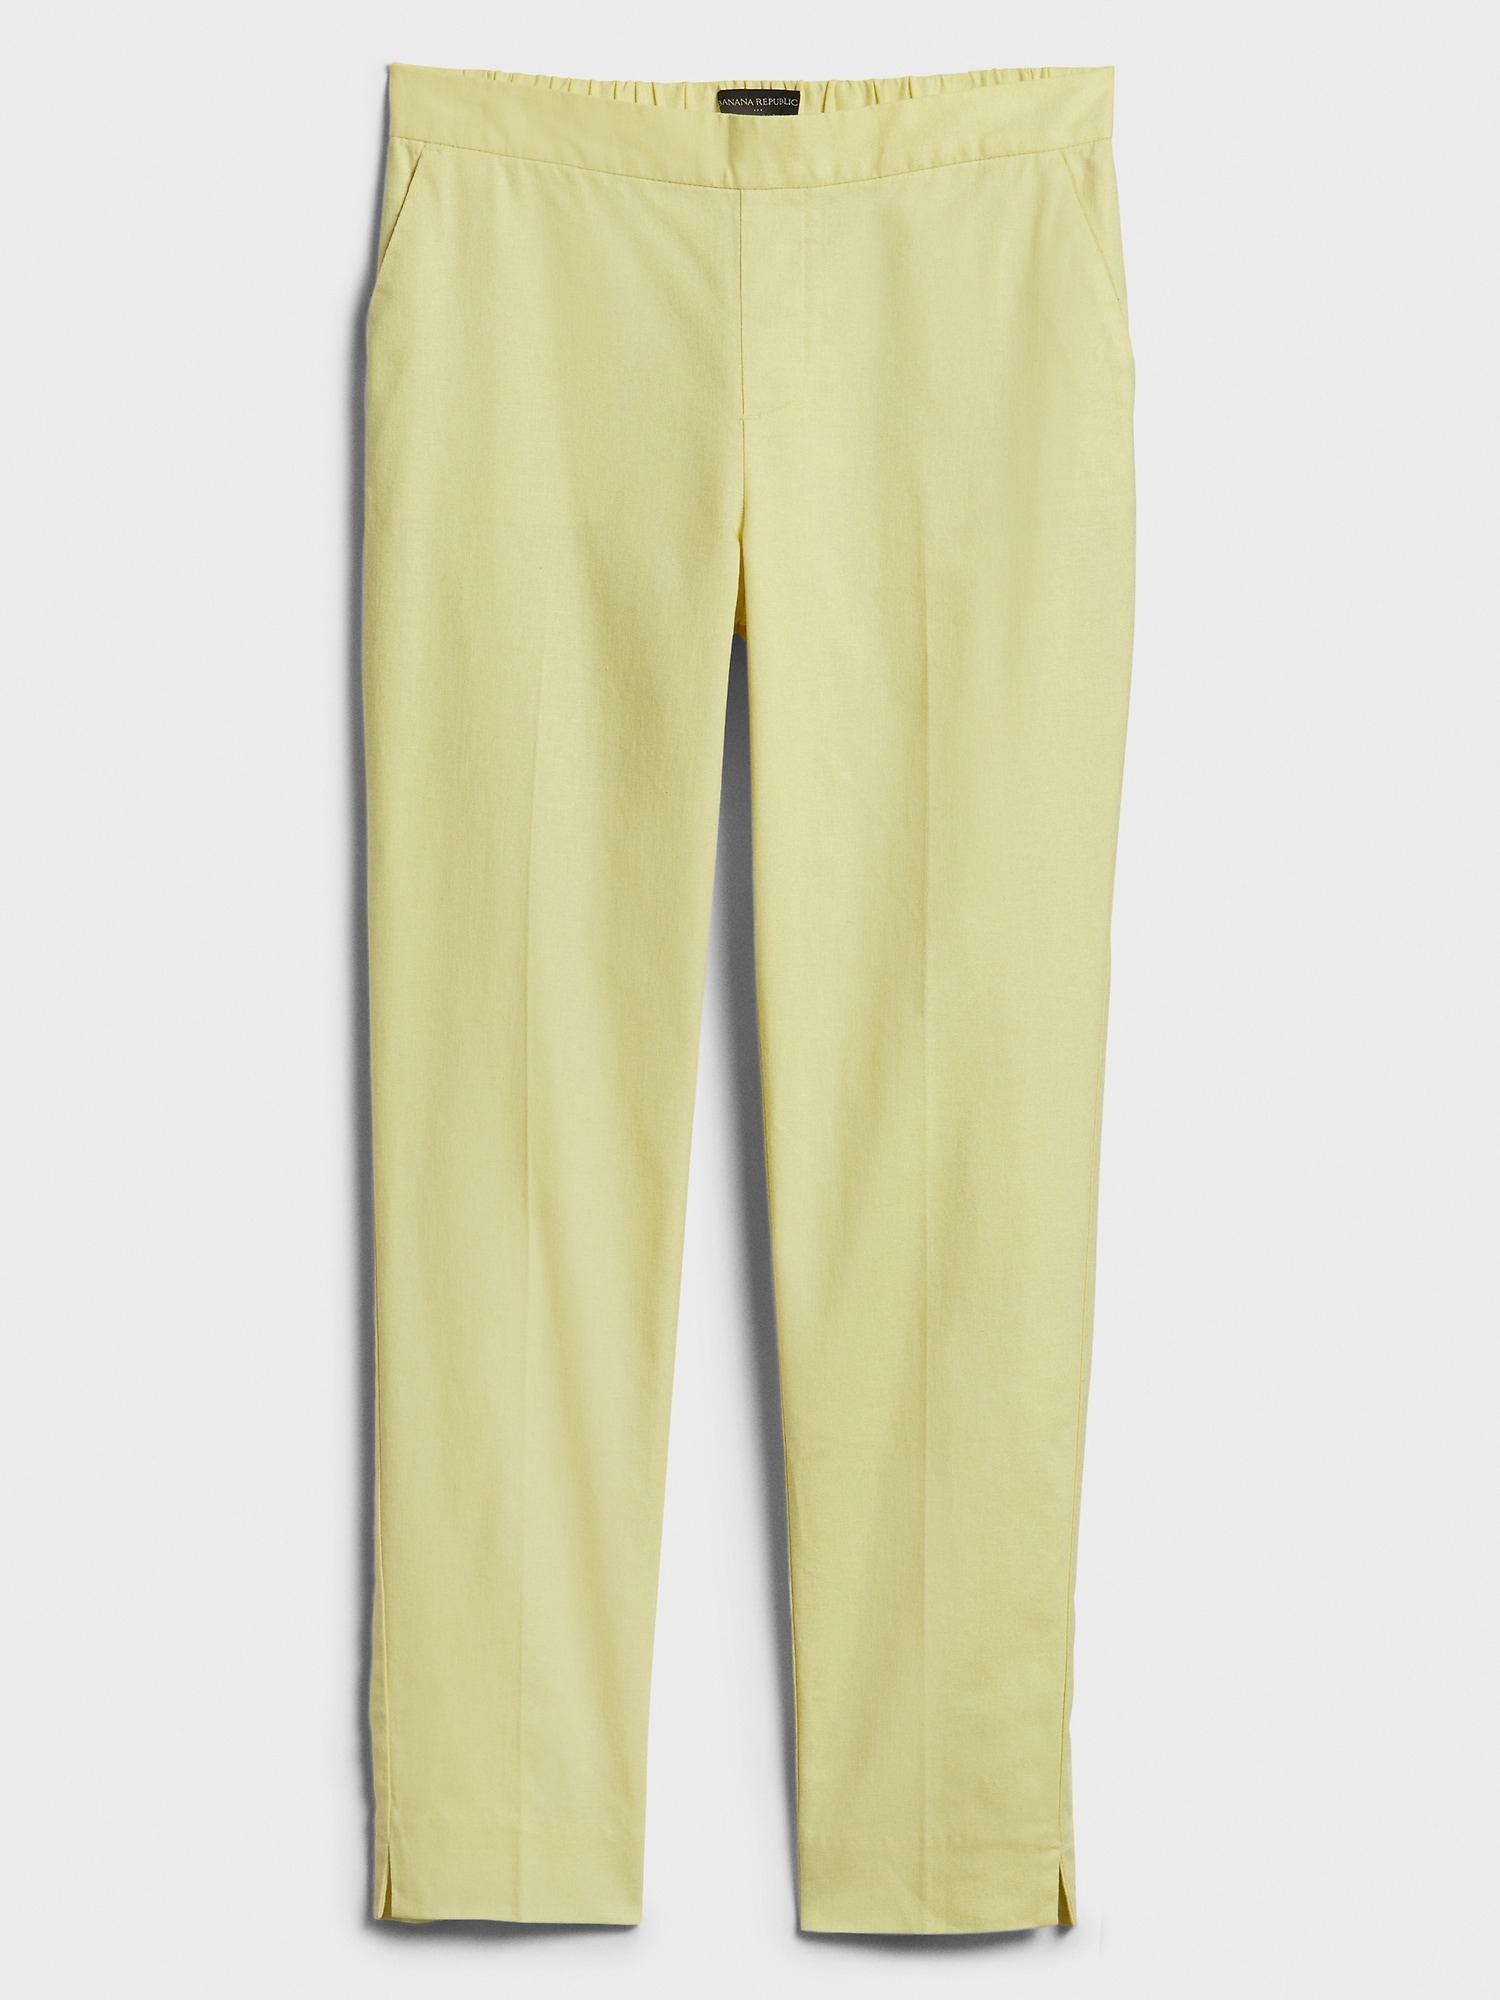 Petite Hayden Stretch Linen Pull-On Ankle Pant